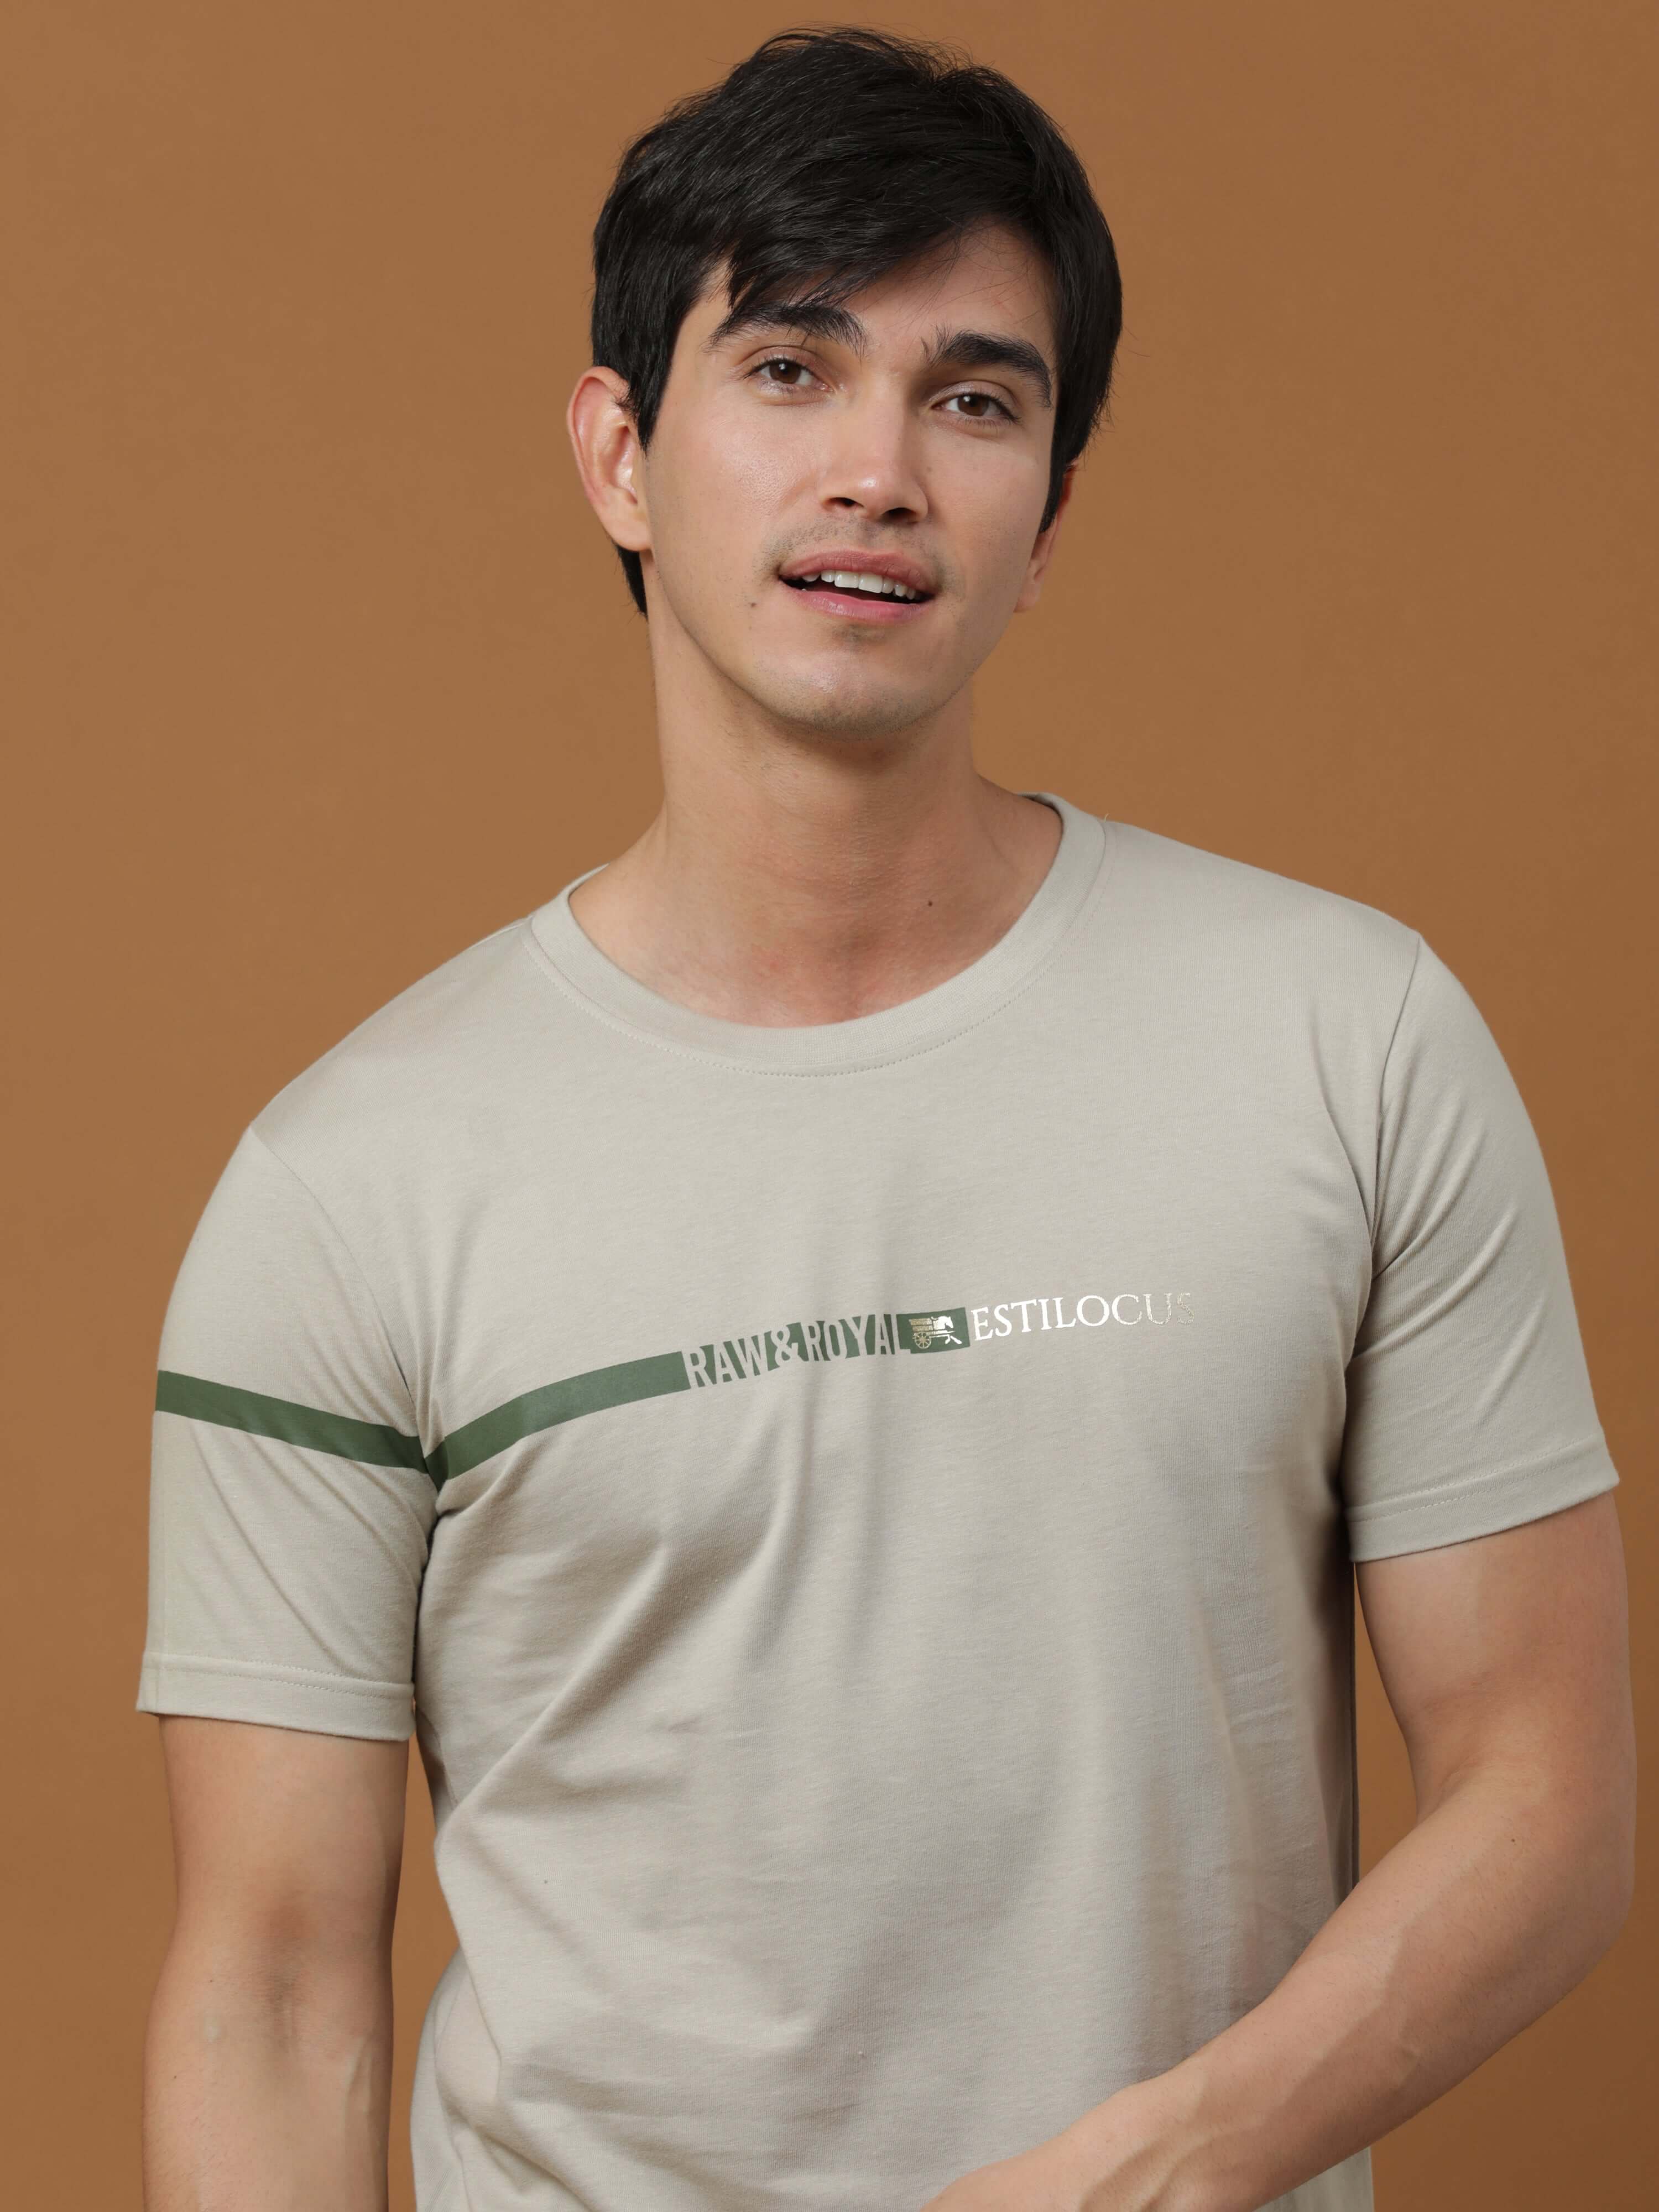 Raw&royal Beige Printed T Shirt shop online at Estilocus. 100% Cotton Designed and printed on knitted fabric. The fabric is stretchy and lightweight, with a soft skin feel and no wrinkles. Crew neck collar which is smooth on the neck and keeps you comfort